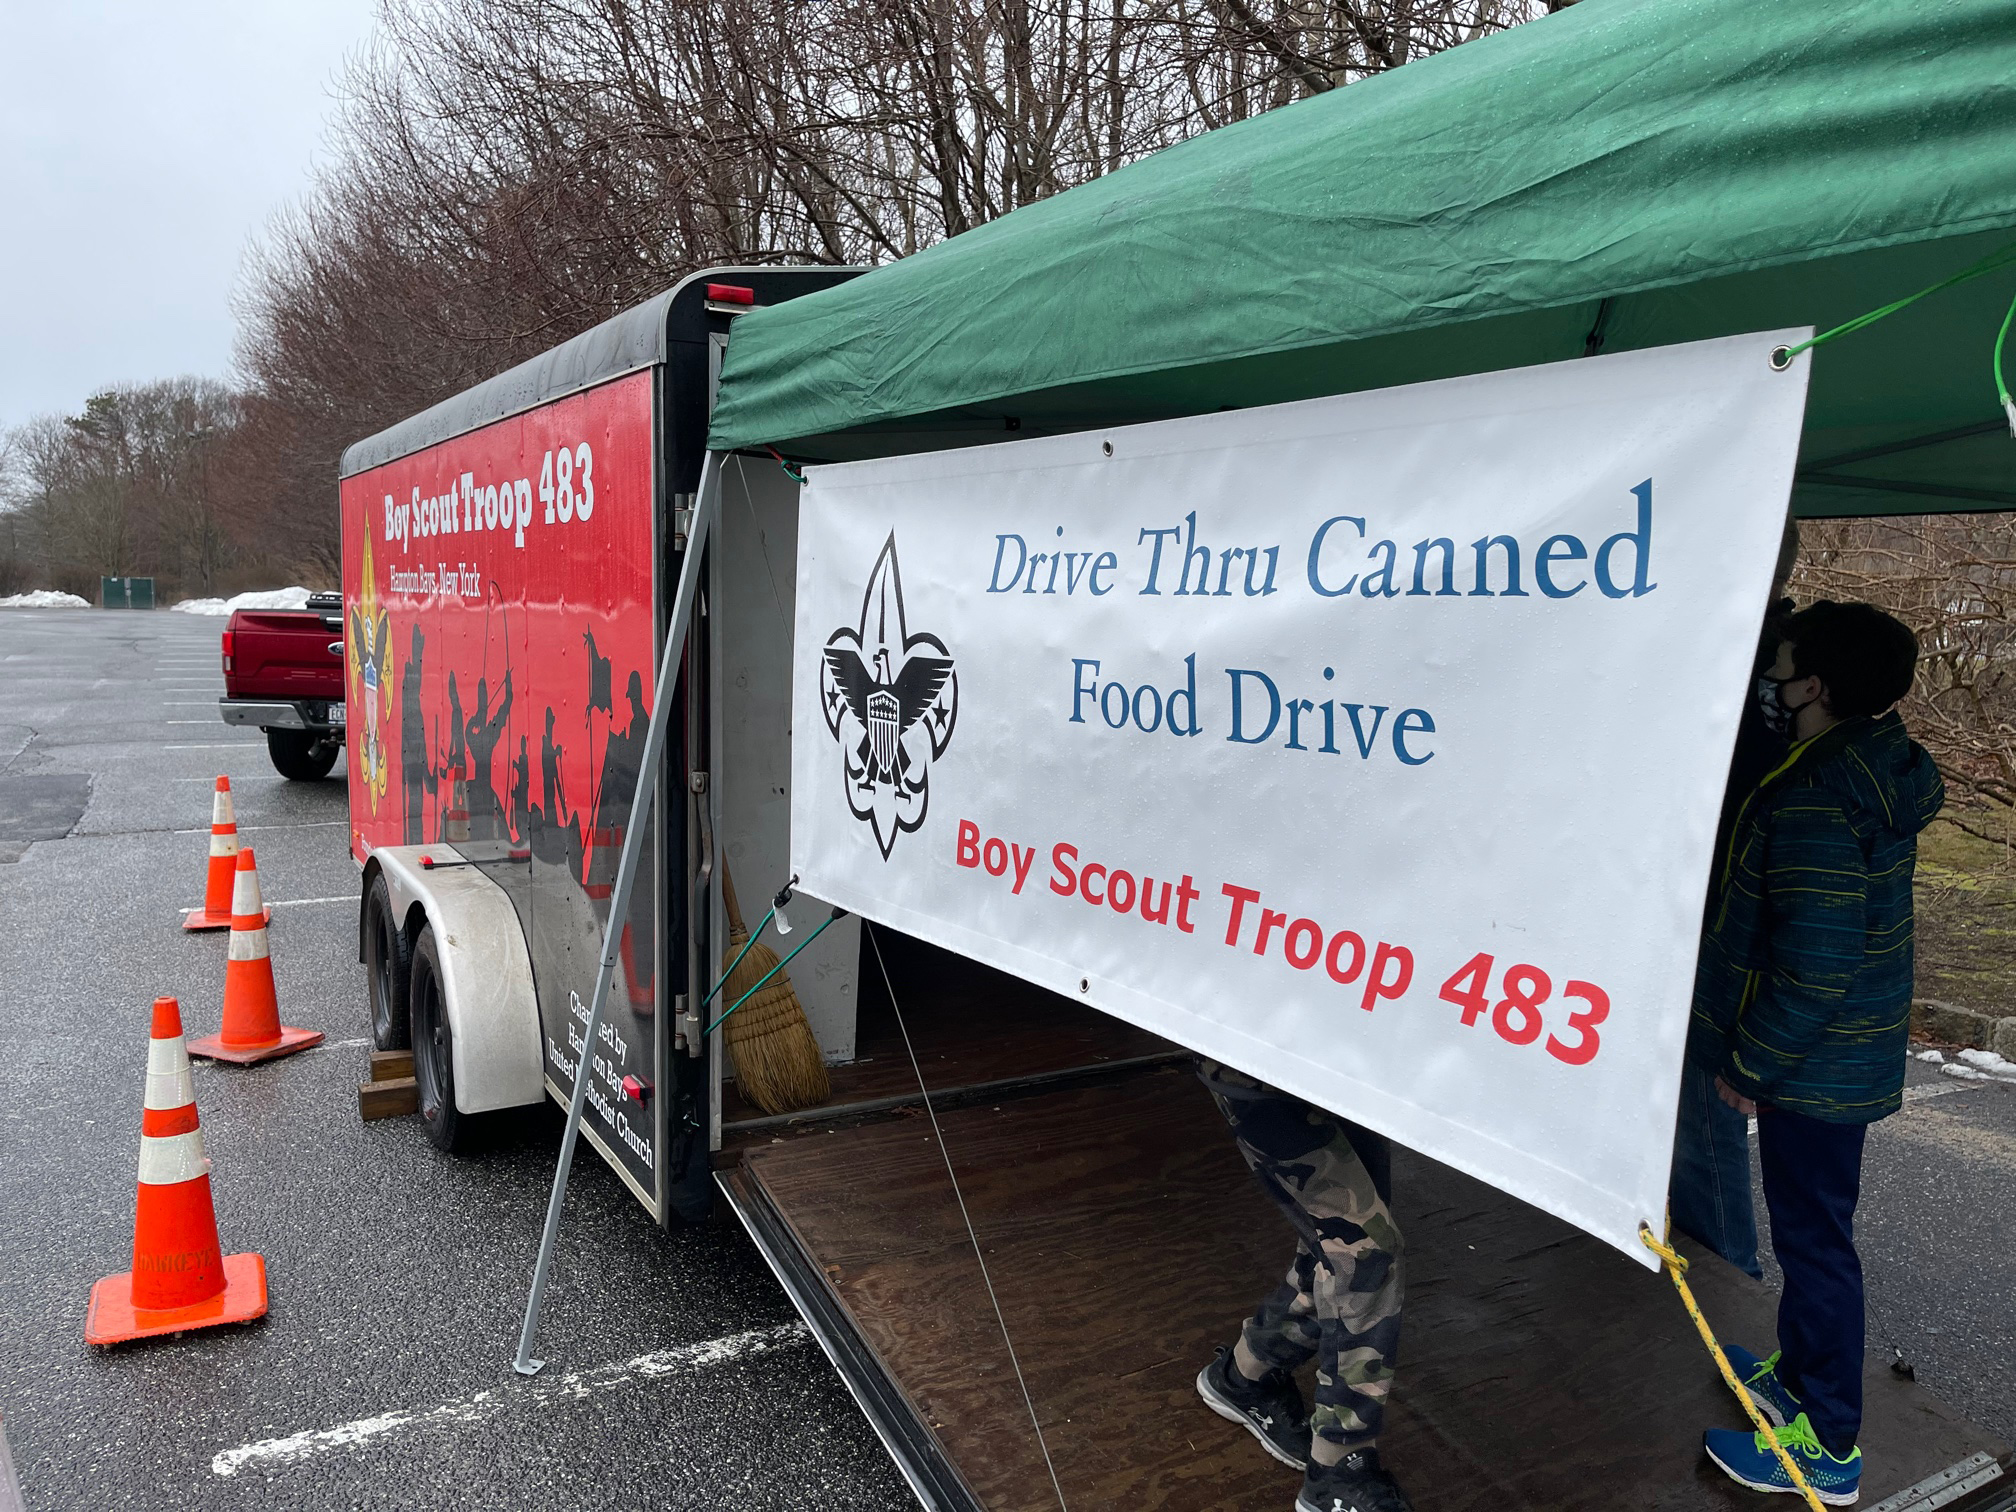 Hampton Bays Boy Scouts Troop 483 canned food drive is this Saturday